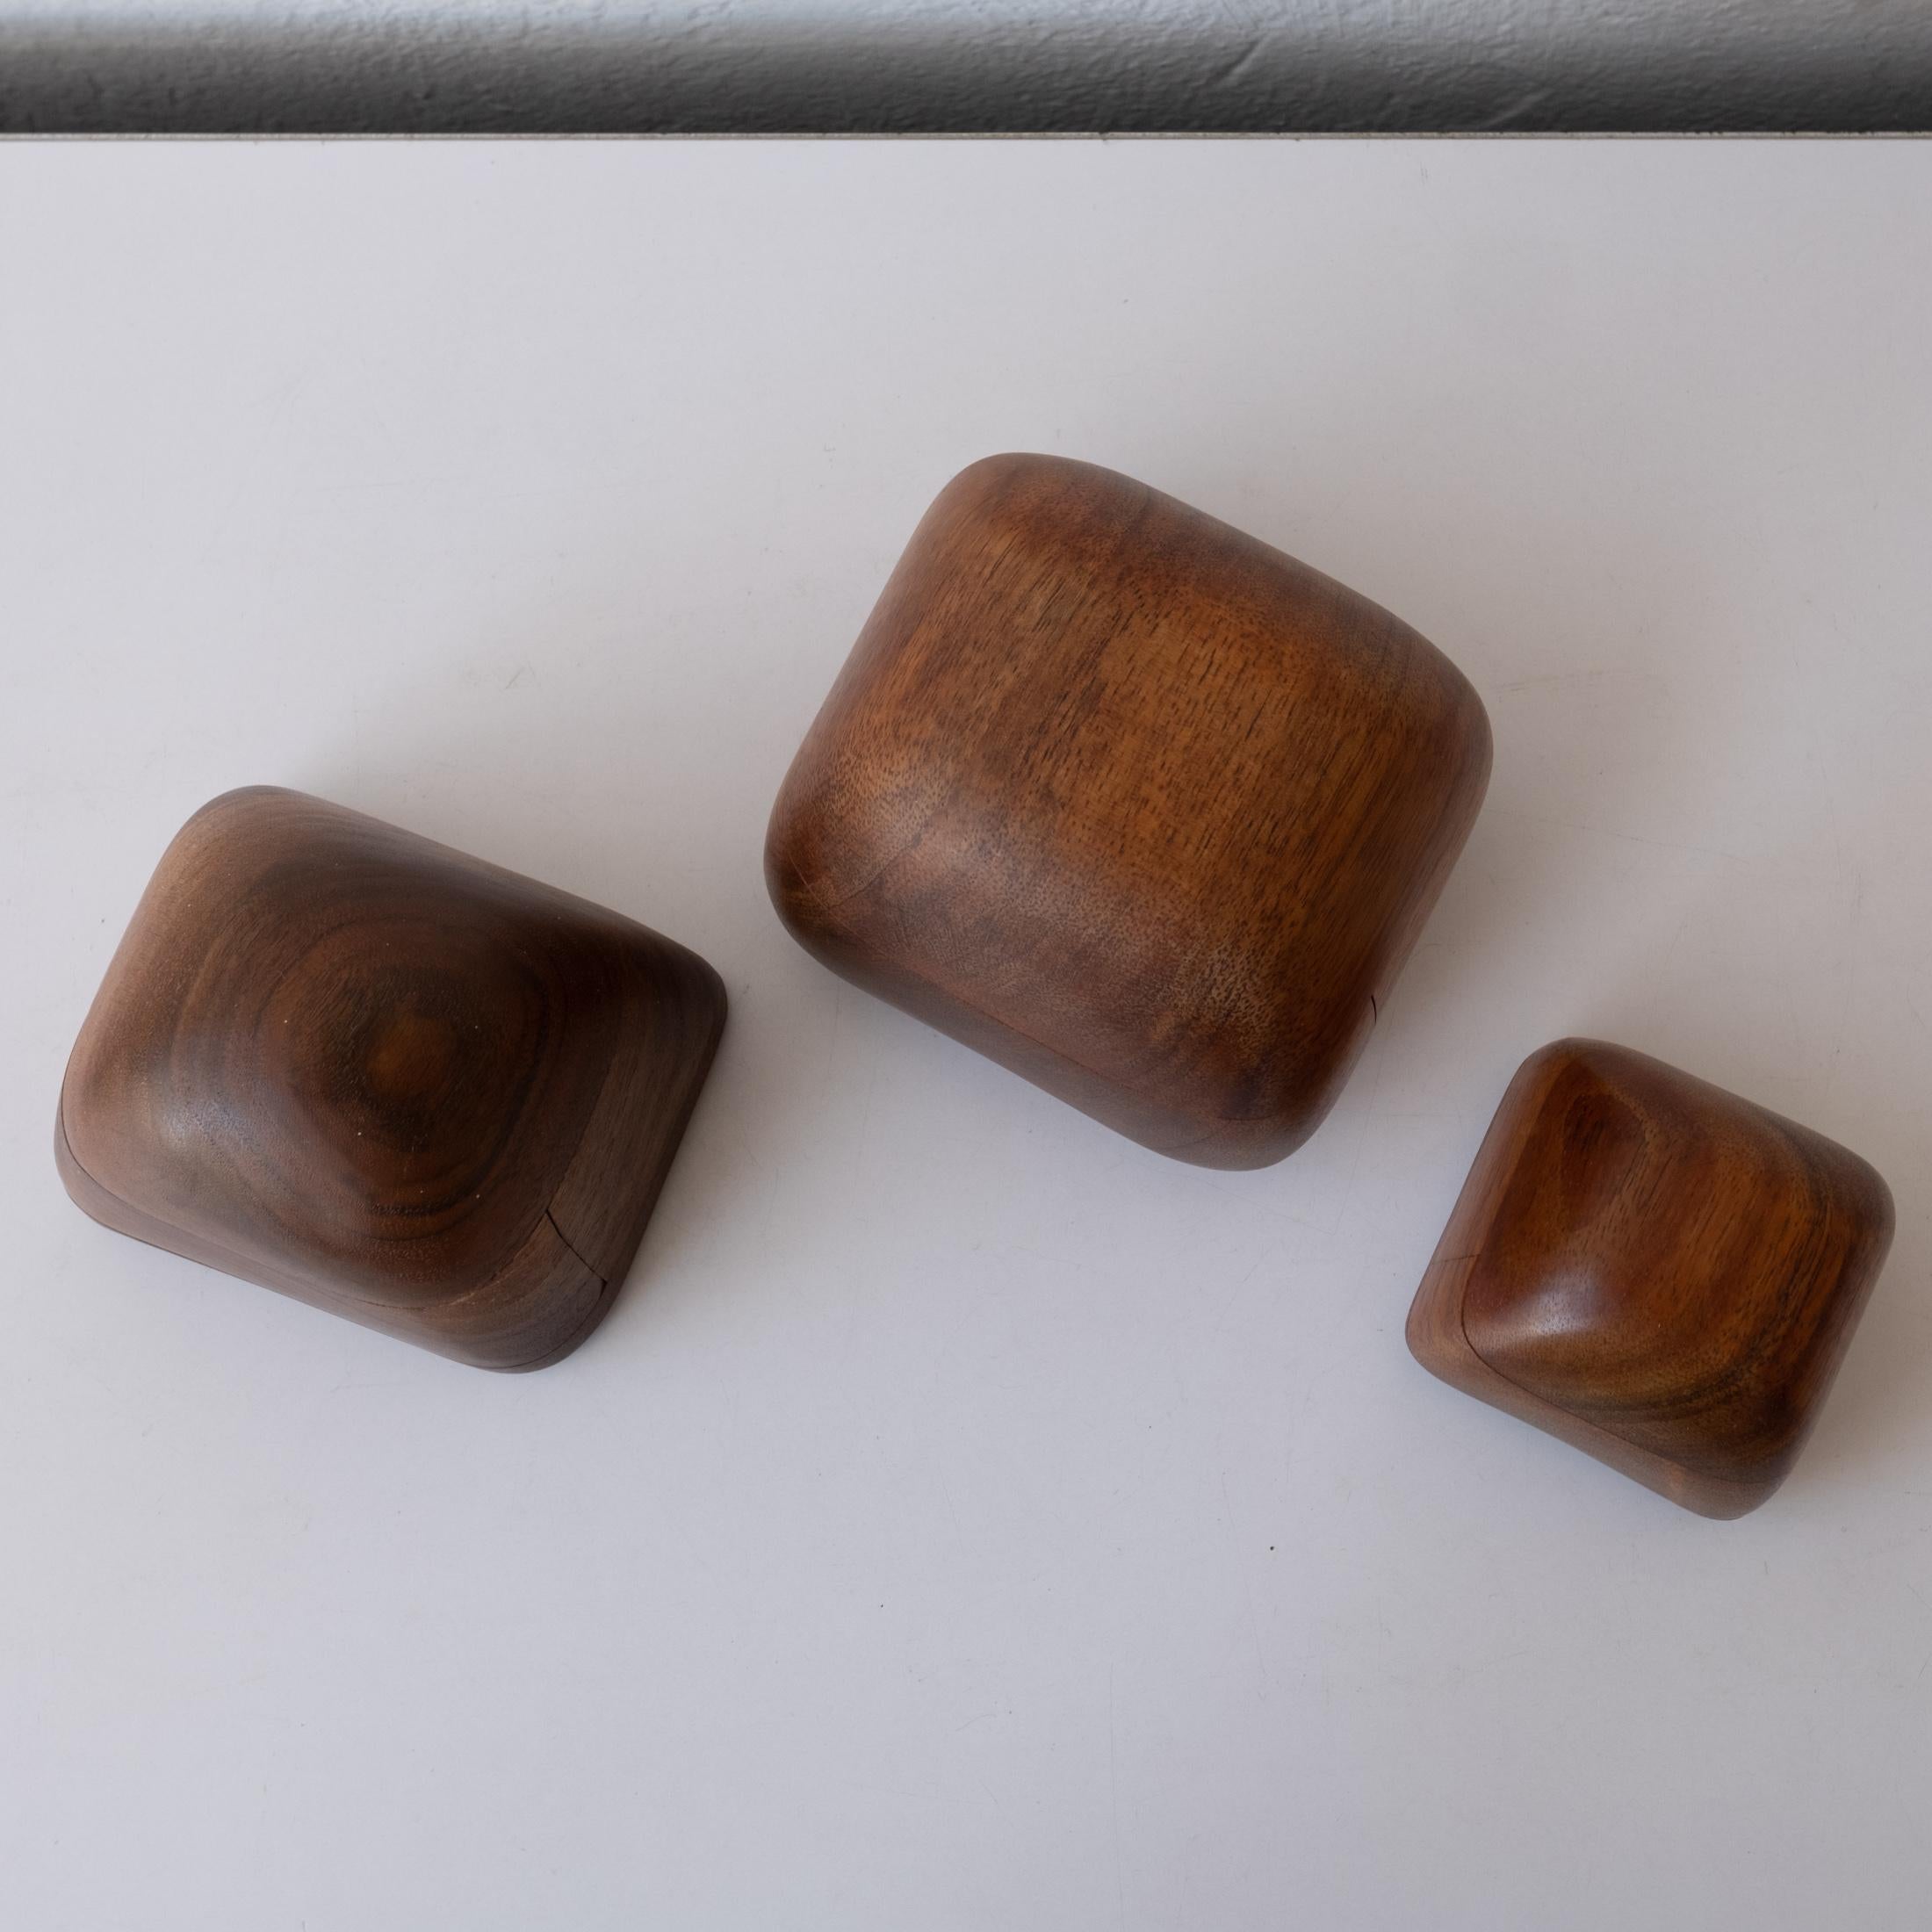 Late 20th Century Studio Handcrafted Wood Jewelry Boxes by Dean Santner, 1970s For Sale